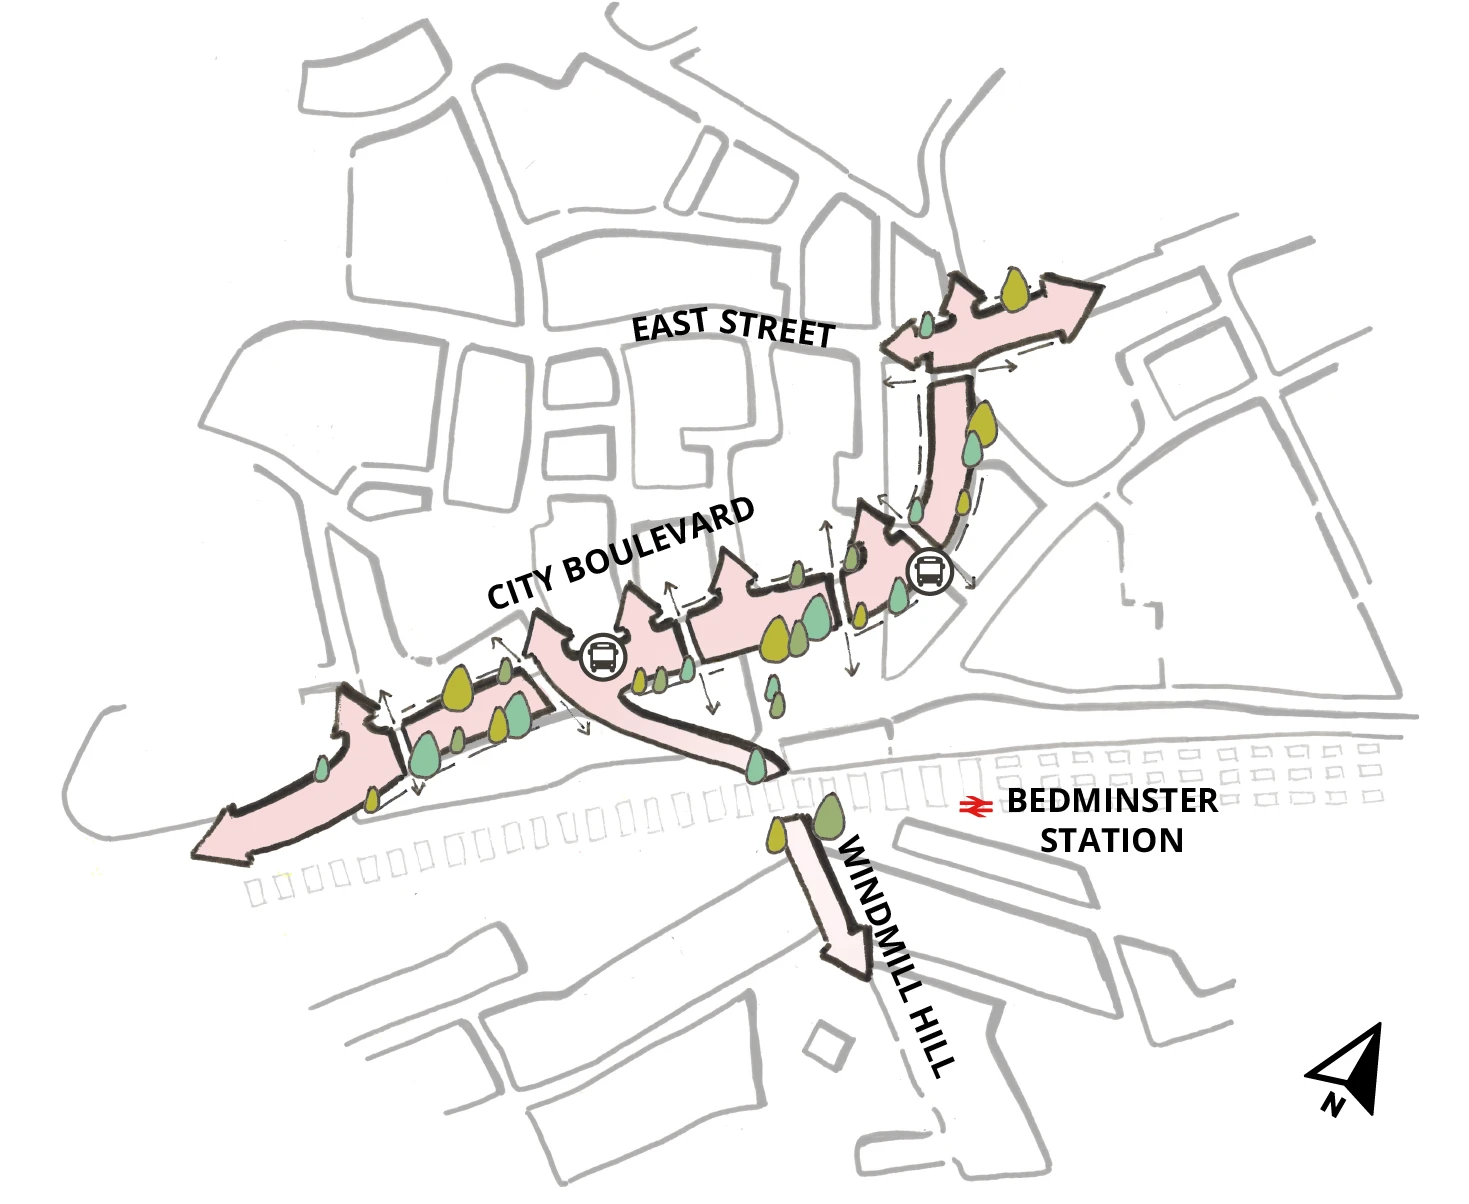 The base of this diagram, which is the same for all the framework diagrams, is a hand drawing showing the urban blocks of the wider Bedminster Green area – East Street is towards the top of the image, Dalby Avenue is in the middle, the railway and Bedminster station is below that and Windmill Hill is at the bottom. A light pink arrow runs between Malago Road and Bedminster Parade. The arrow is lined with trees. Along the arrow there are smaller arrows that run along the adjoining roads with the most prominent one going along Windmill Hill.